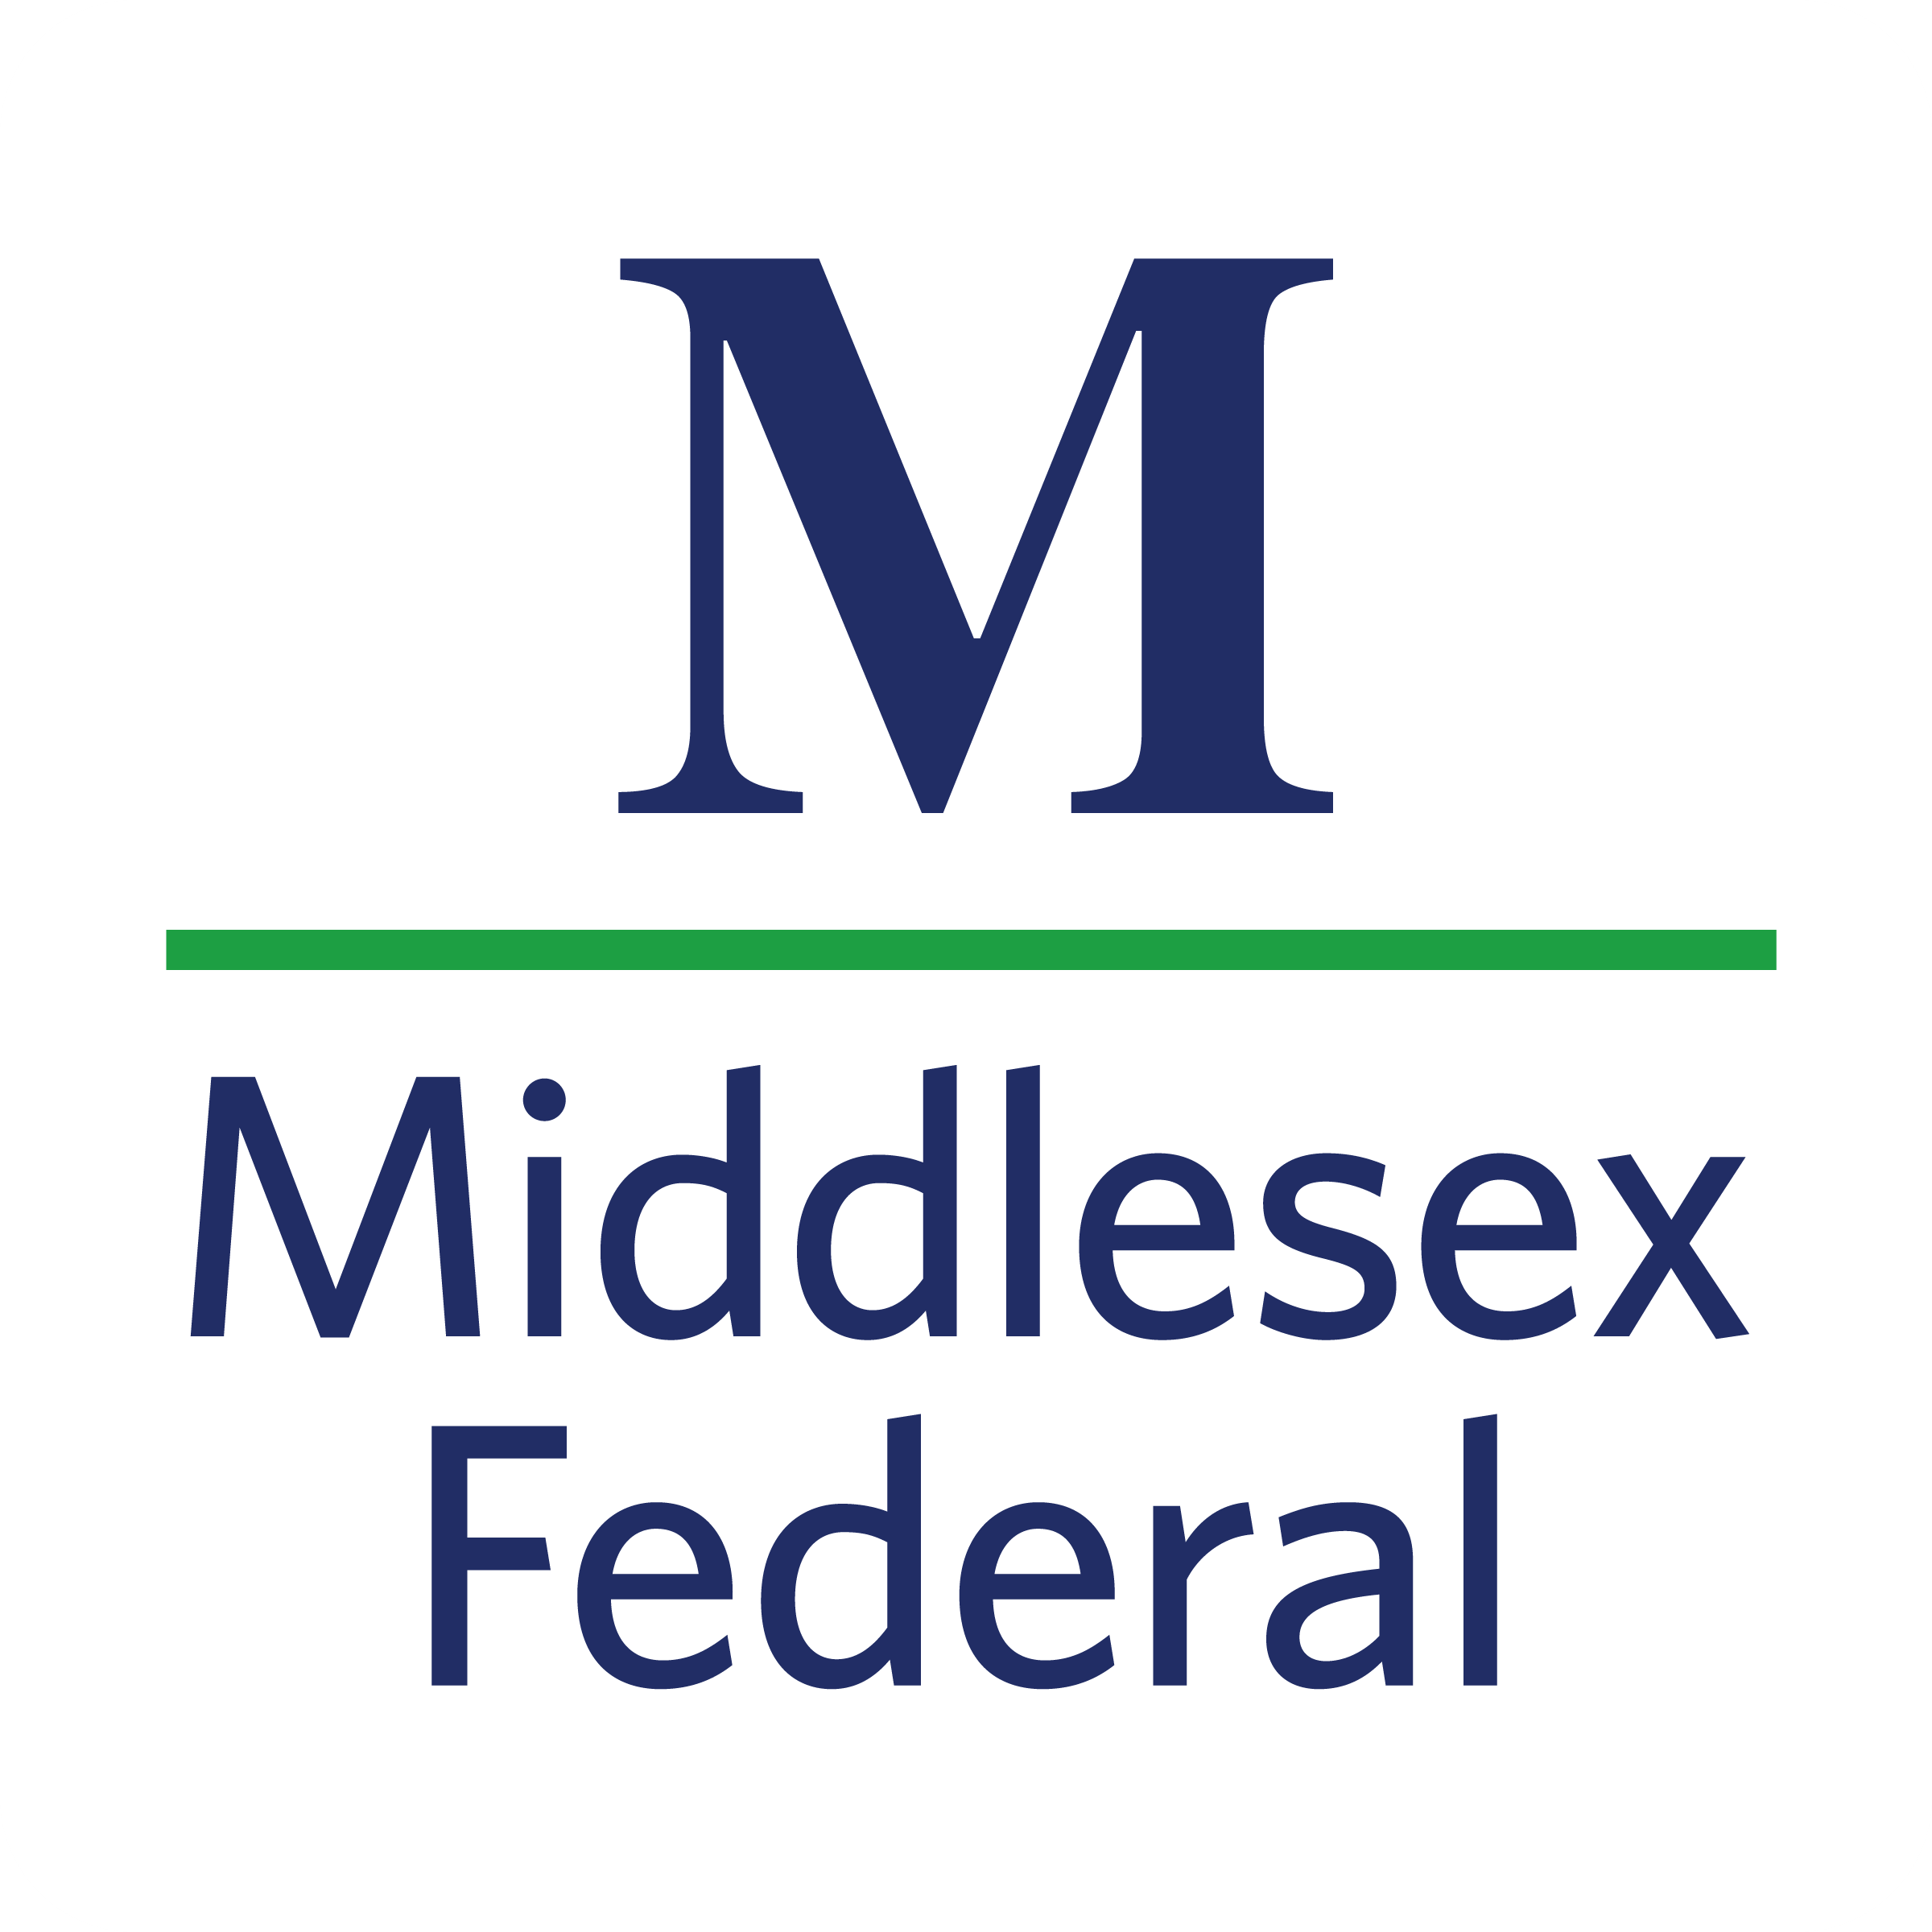 Middlesex Federal